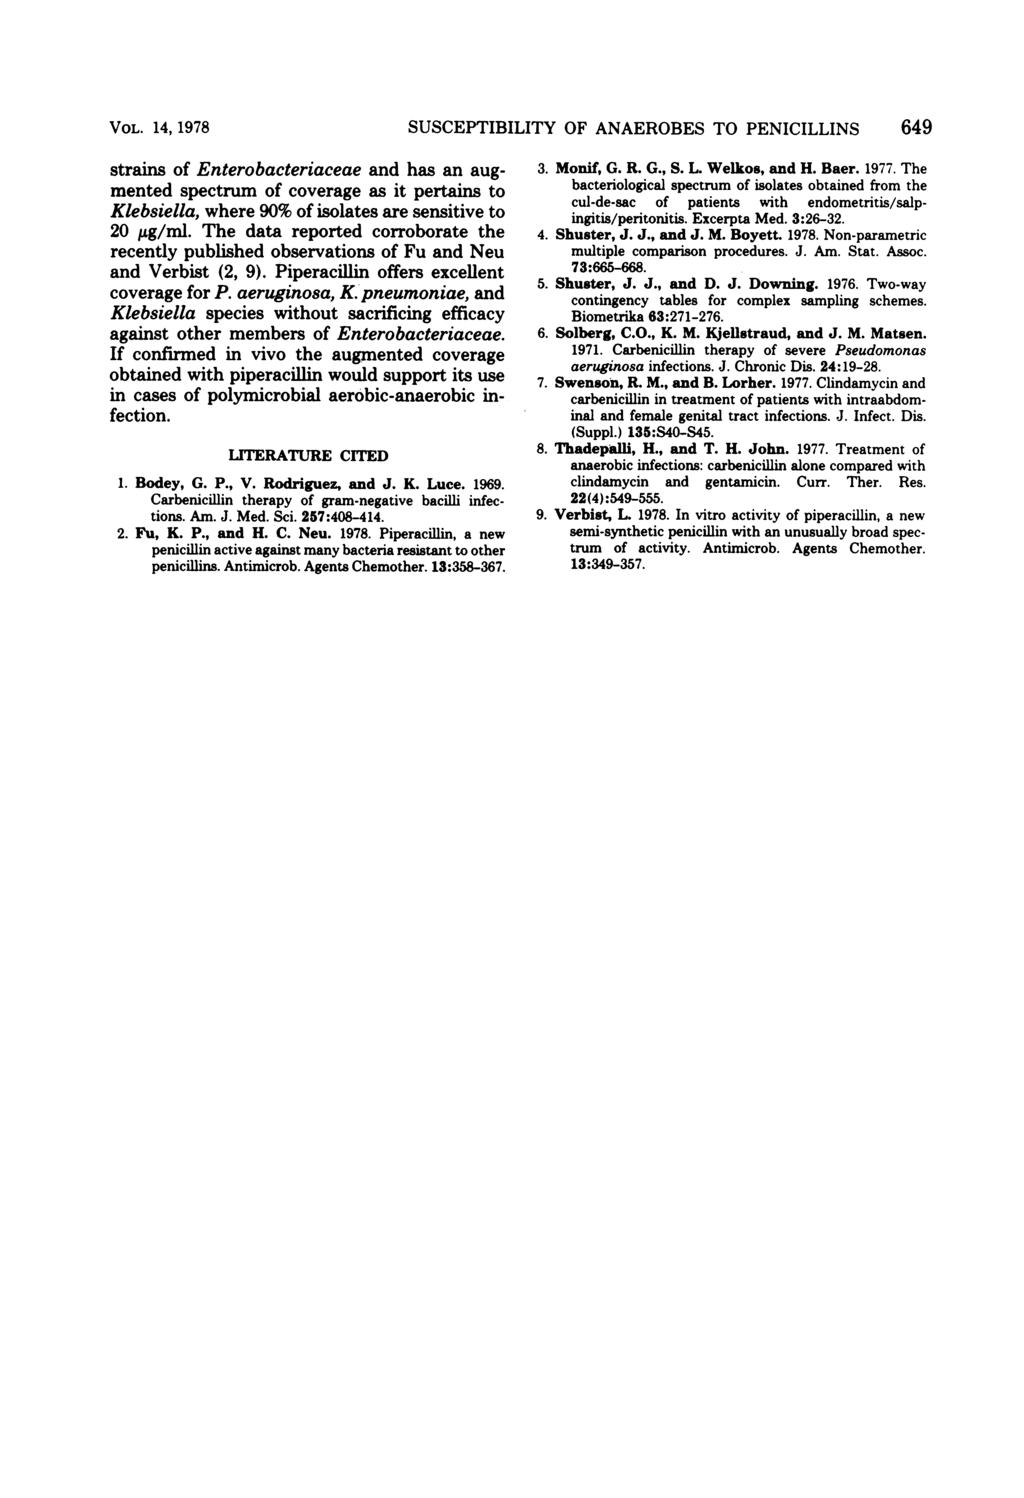 VOL. 14, 1978 SUSCEPTIBILITY OF ANAEROBES TO PENICILLINS 649 strains of Enterobacteriaceae and has an augmented spectrum of coverage as it pertains to Klebsiella, where 90% of isolates are sensitive